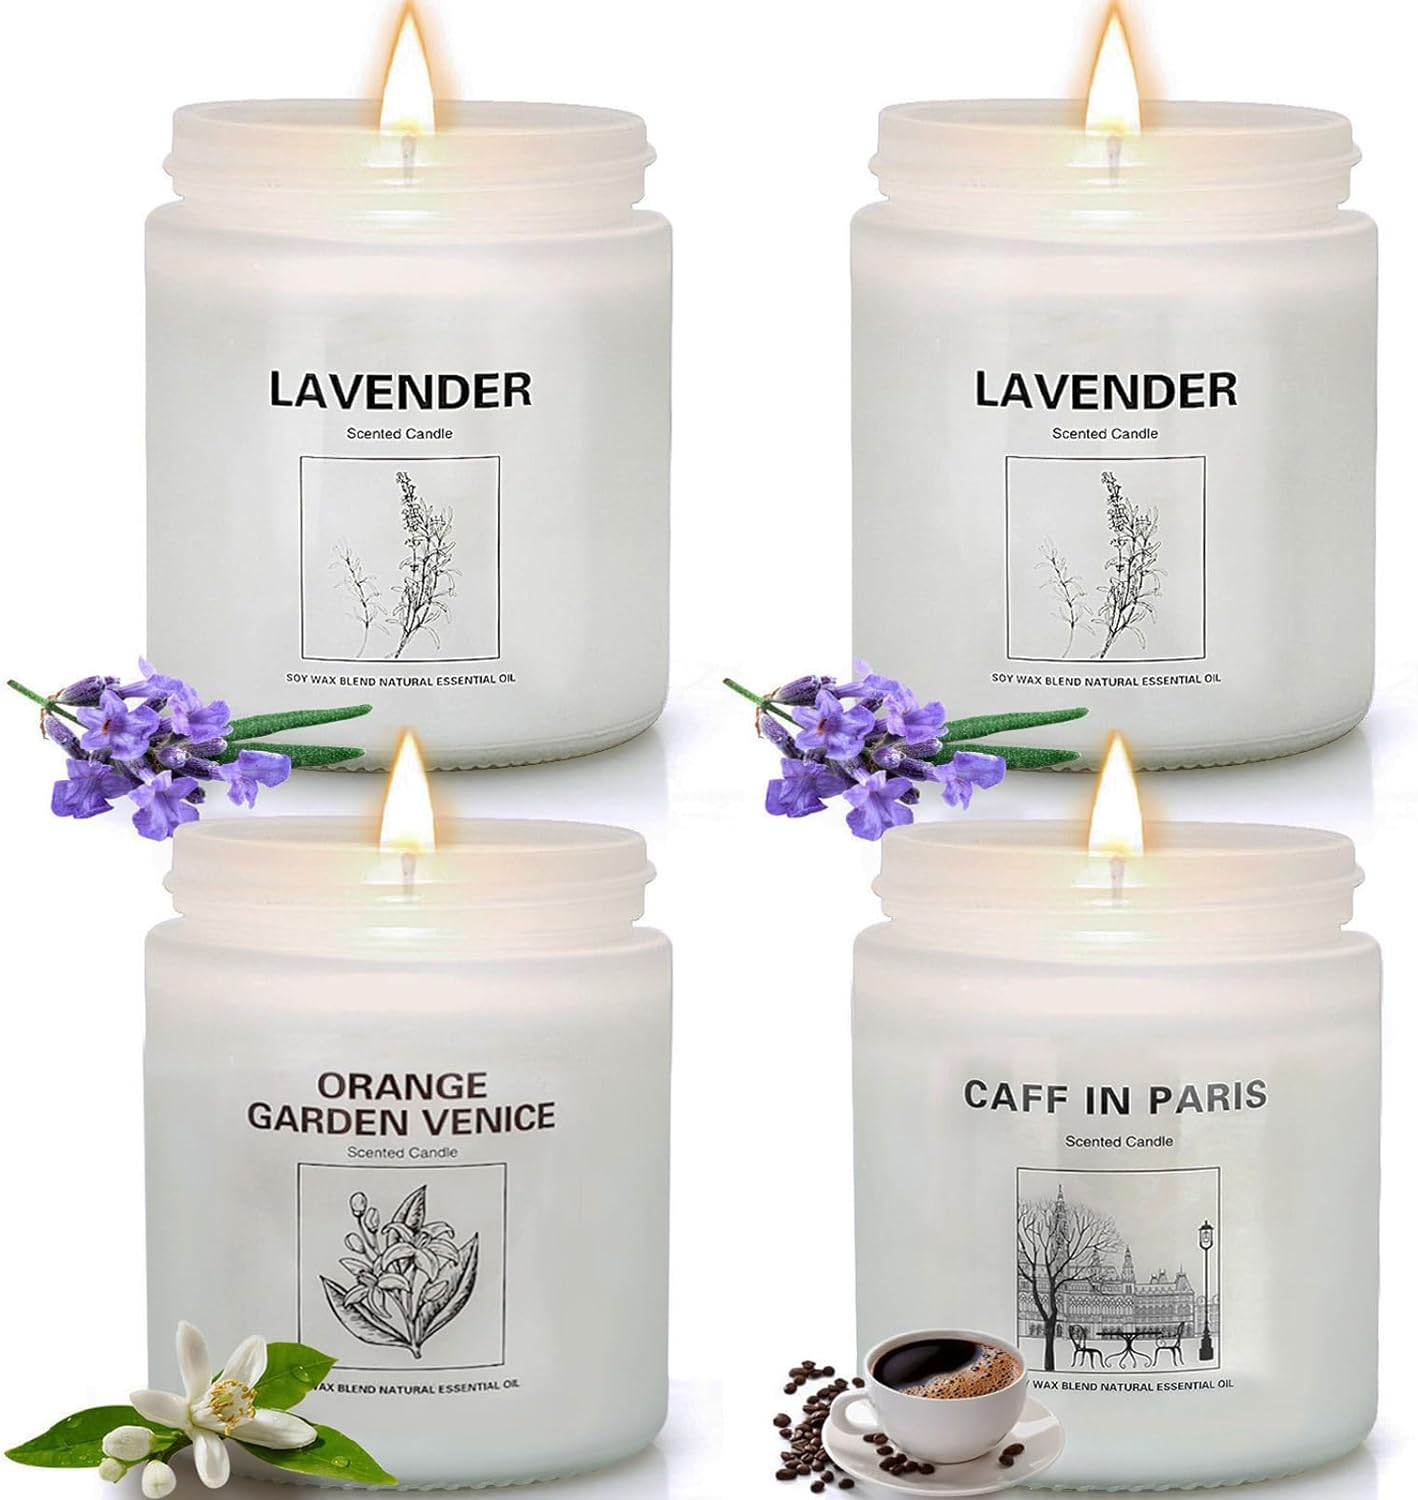 Discover the perfect scented candle for your home. With a variety of scents and styles to choose from, you're sure to find the candle that best suits your preferences.